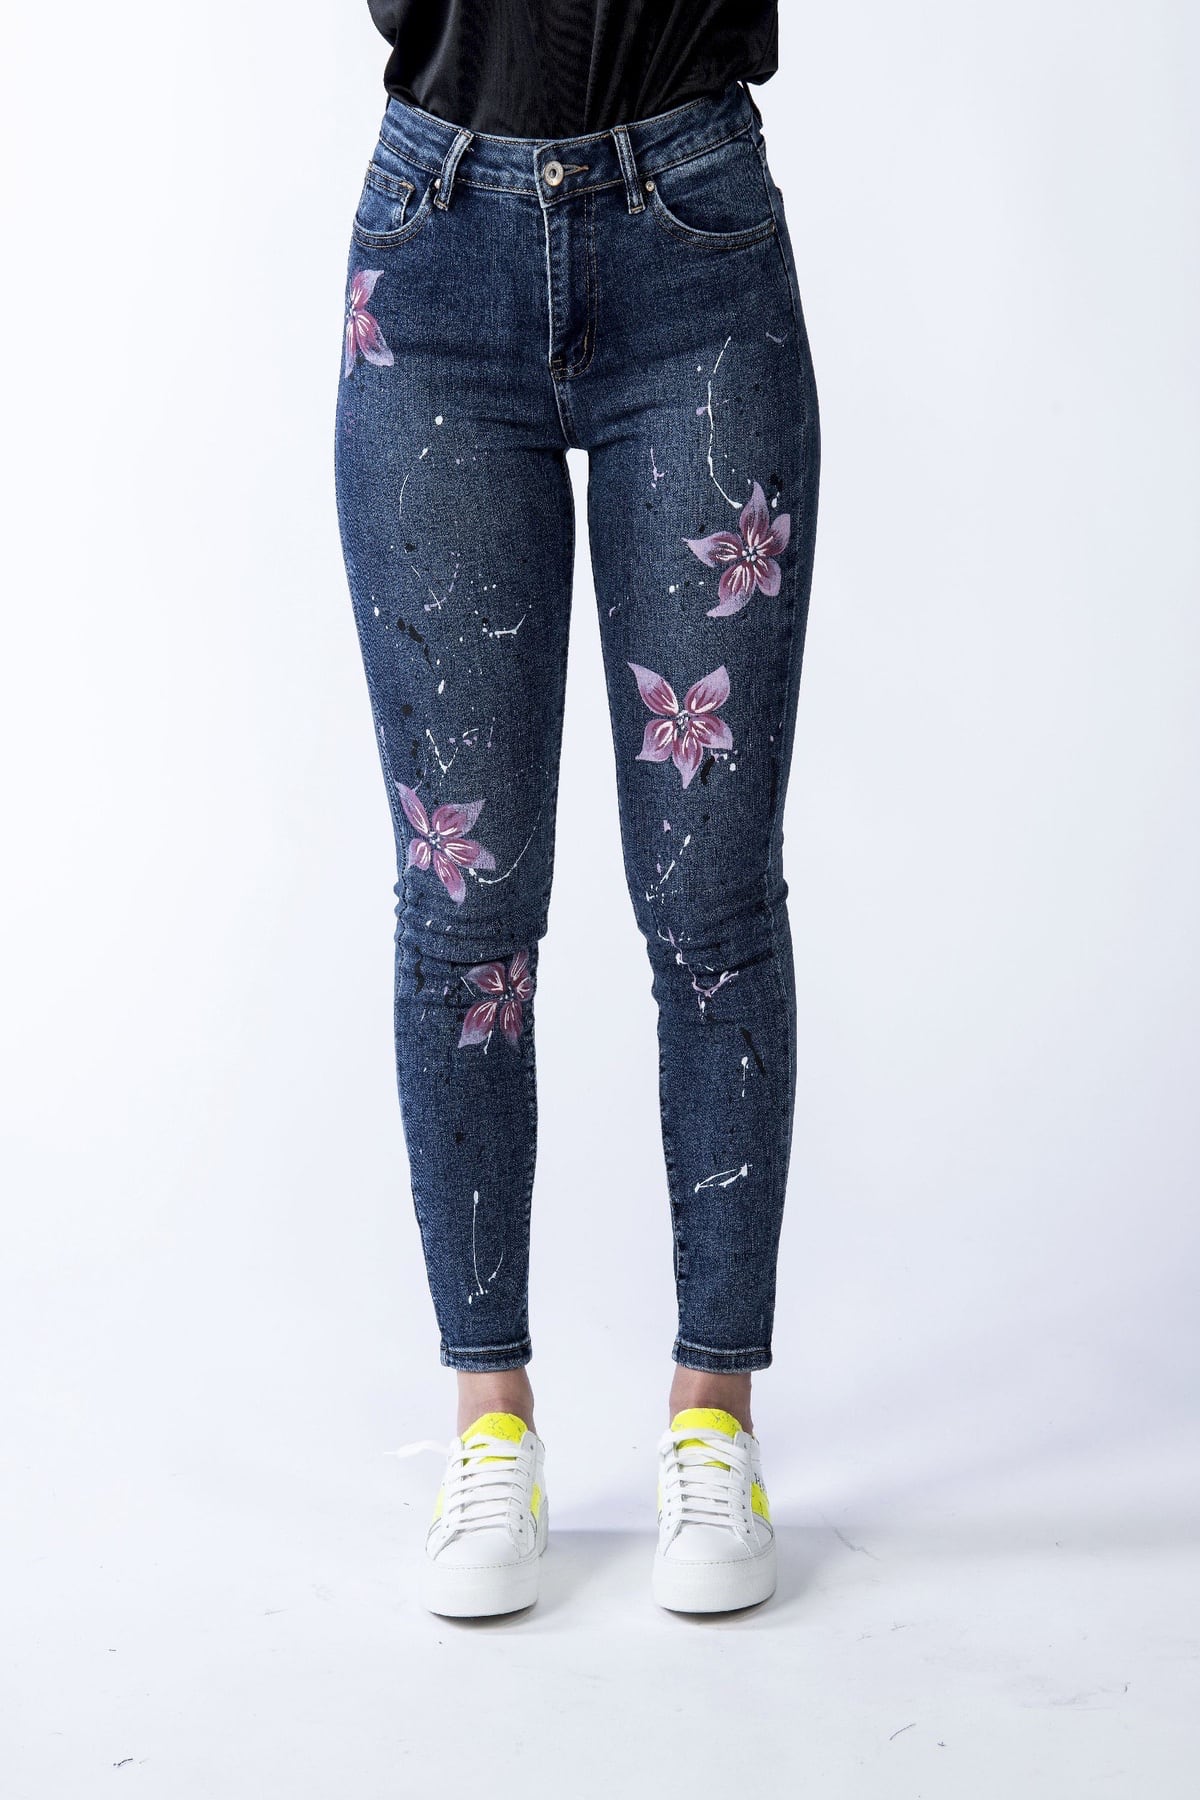 HEXIS women's jeans with flower